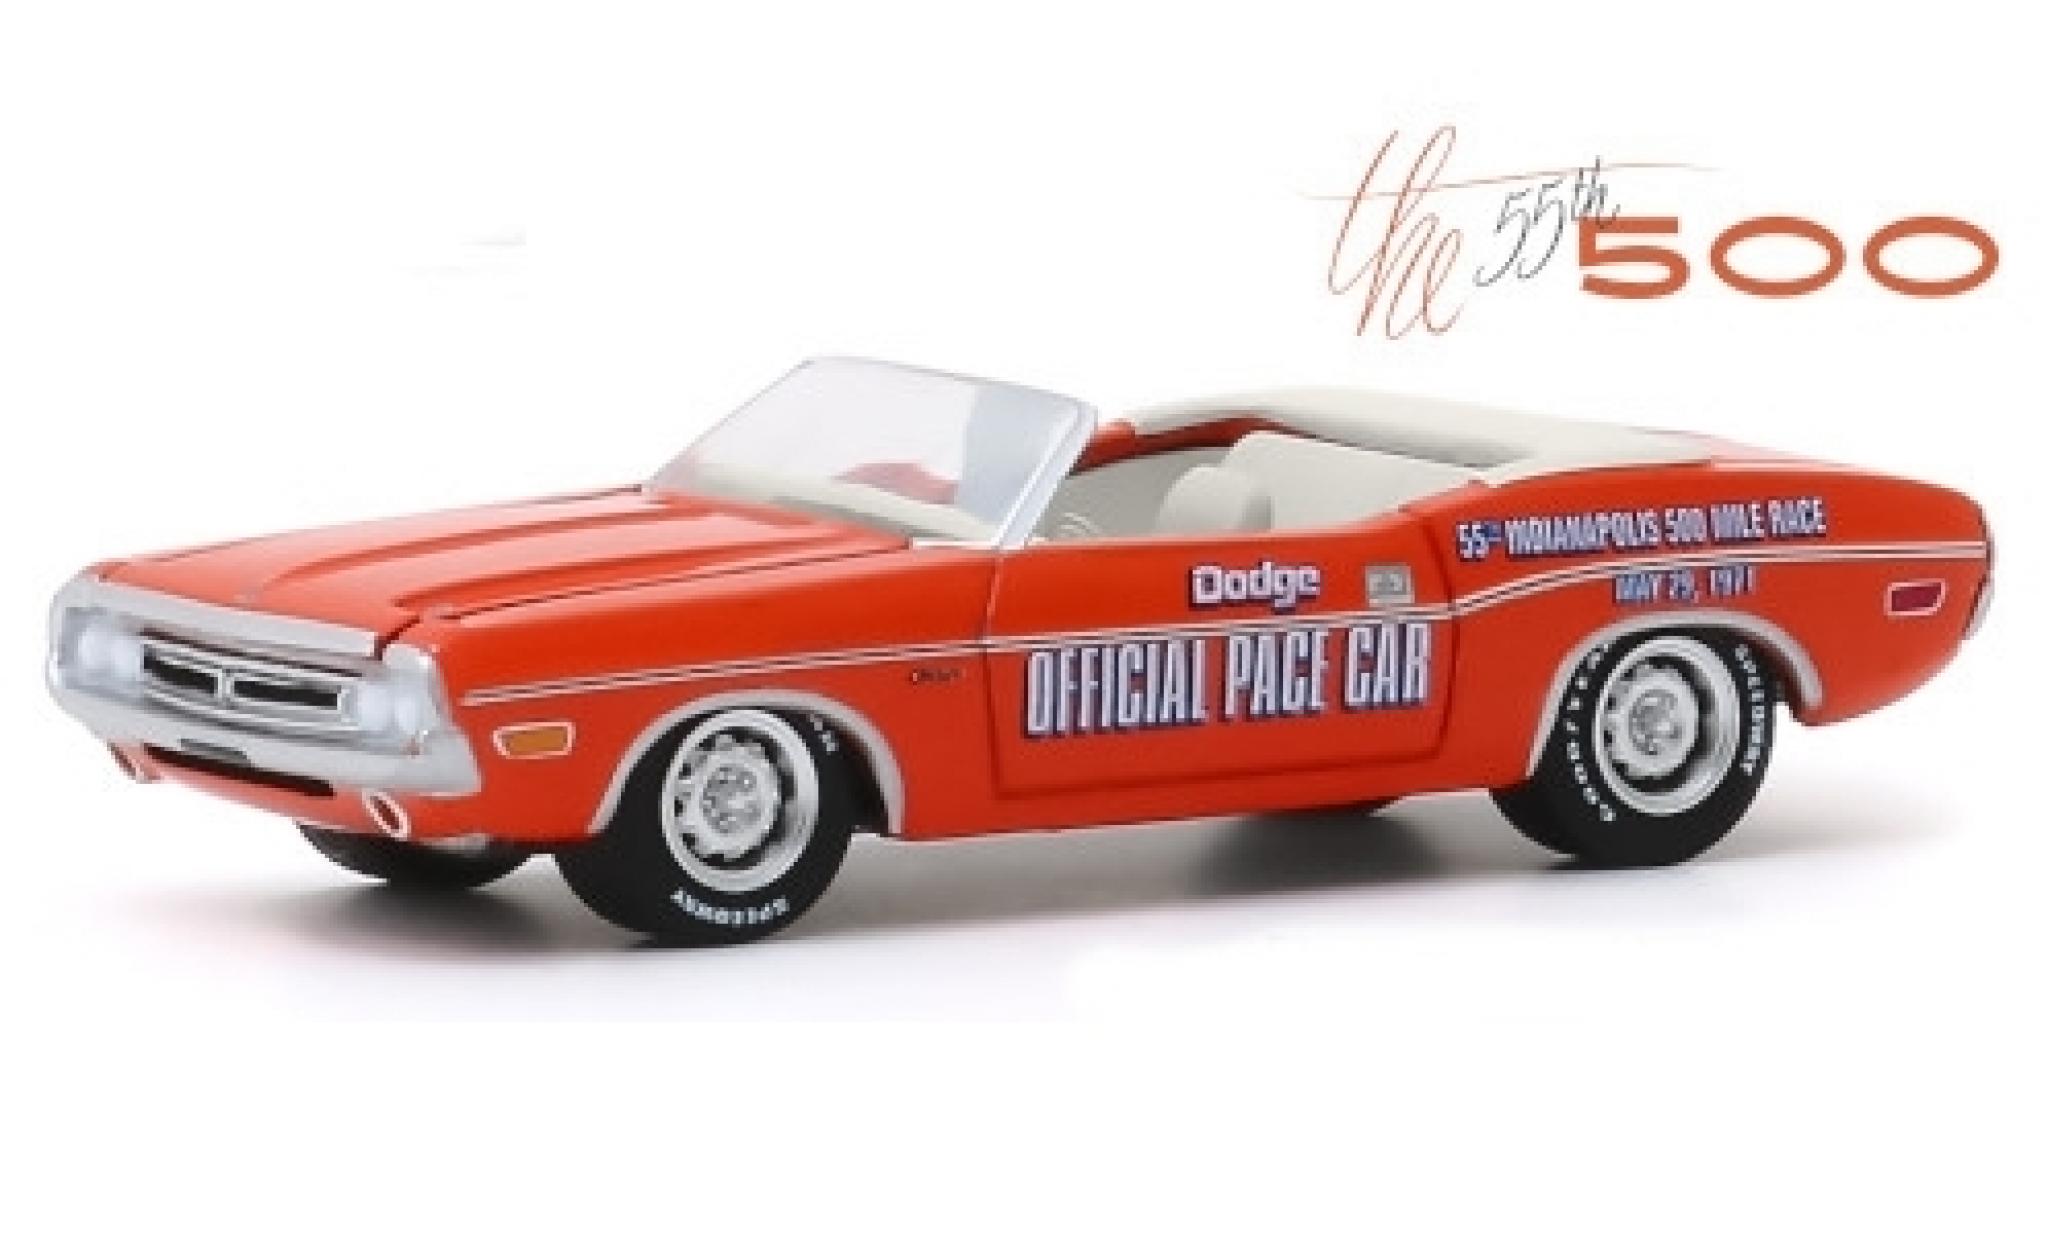 Dodge Challenger 1/64 Greenlight Convertible orange/Dekor Official Pace Car 1971 55th Indianapolis 500 Mile Race